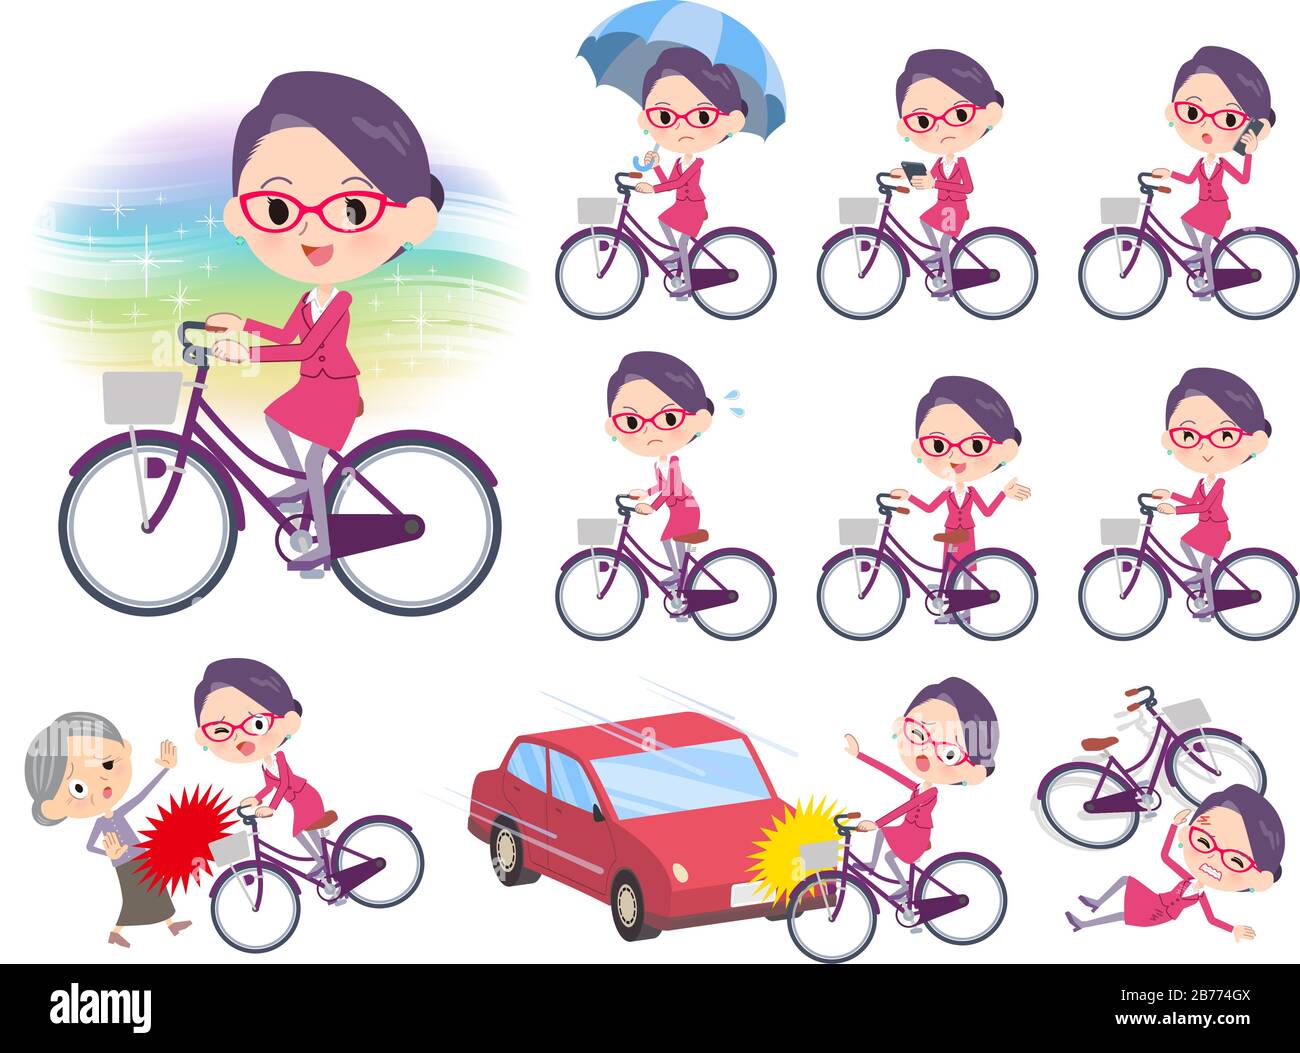 A set of women riding a city cycle.There are actions on manners and troubles.It's vector art so it's easy to edit. Stock Vector